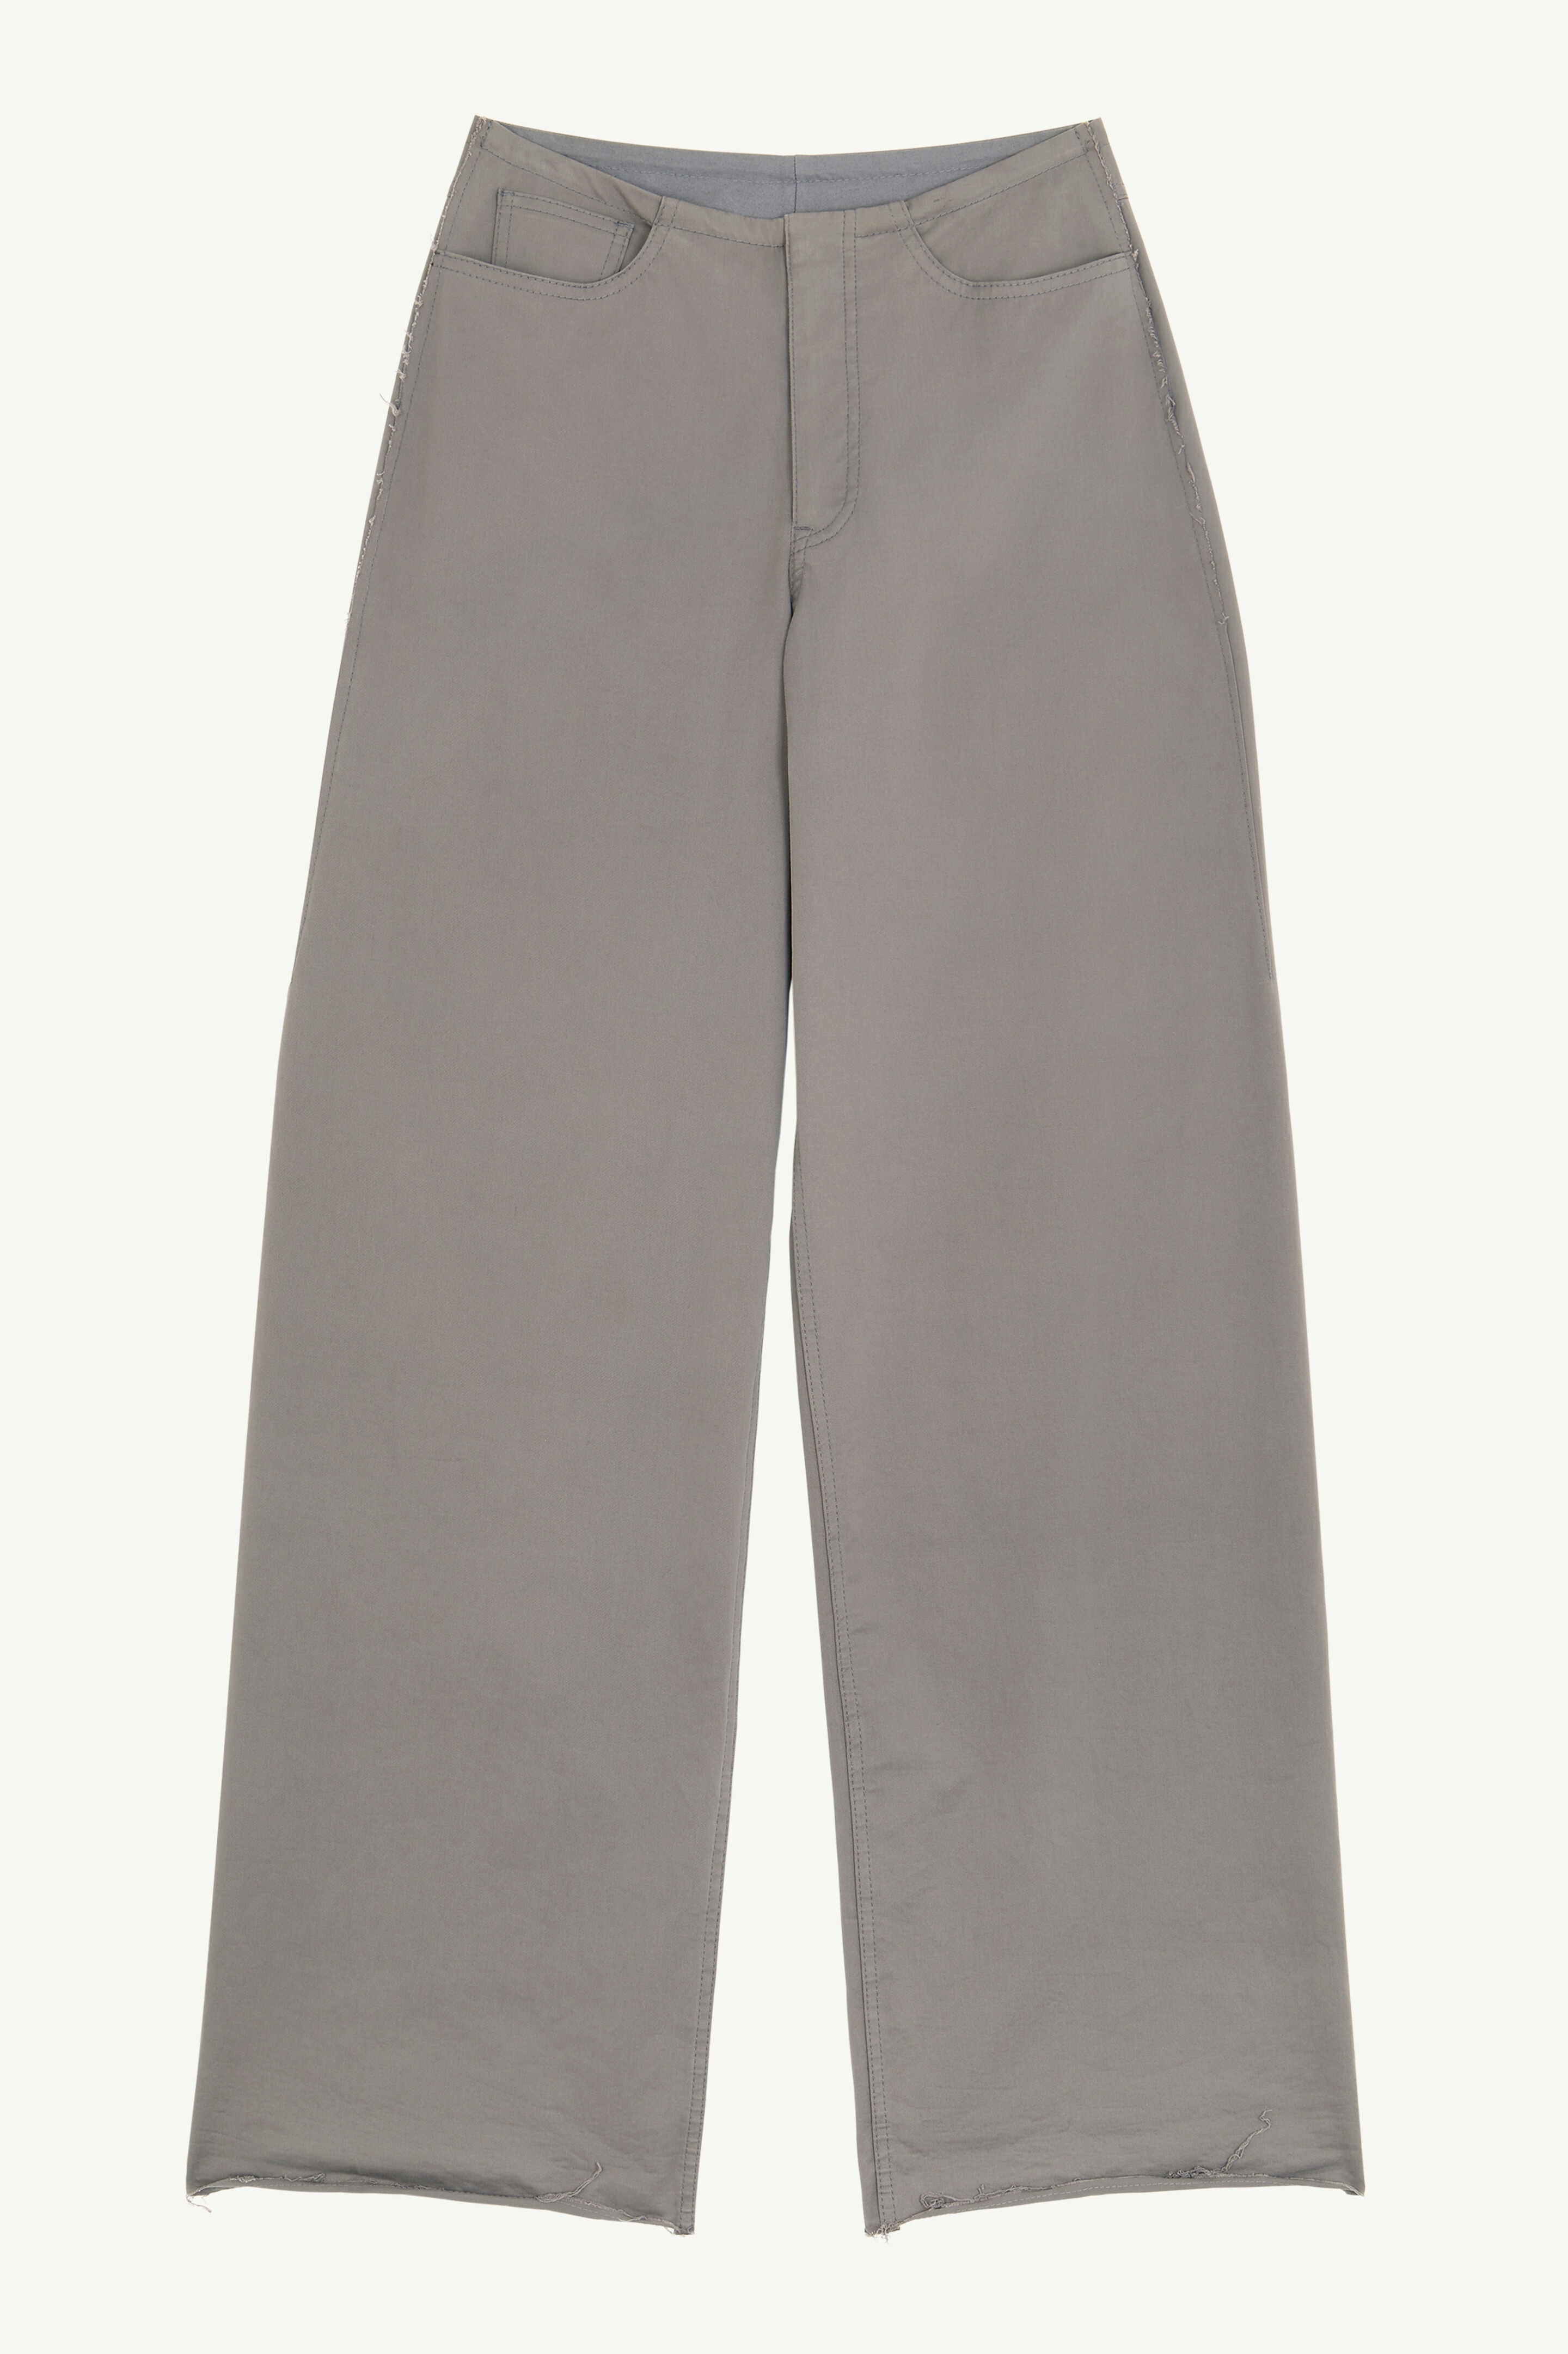 Cotton Twill 5 Pocket Trousers - 1